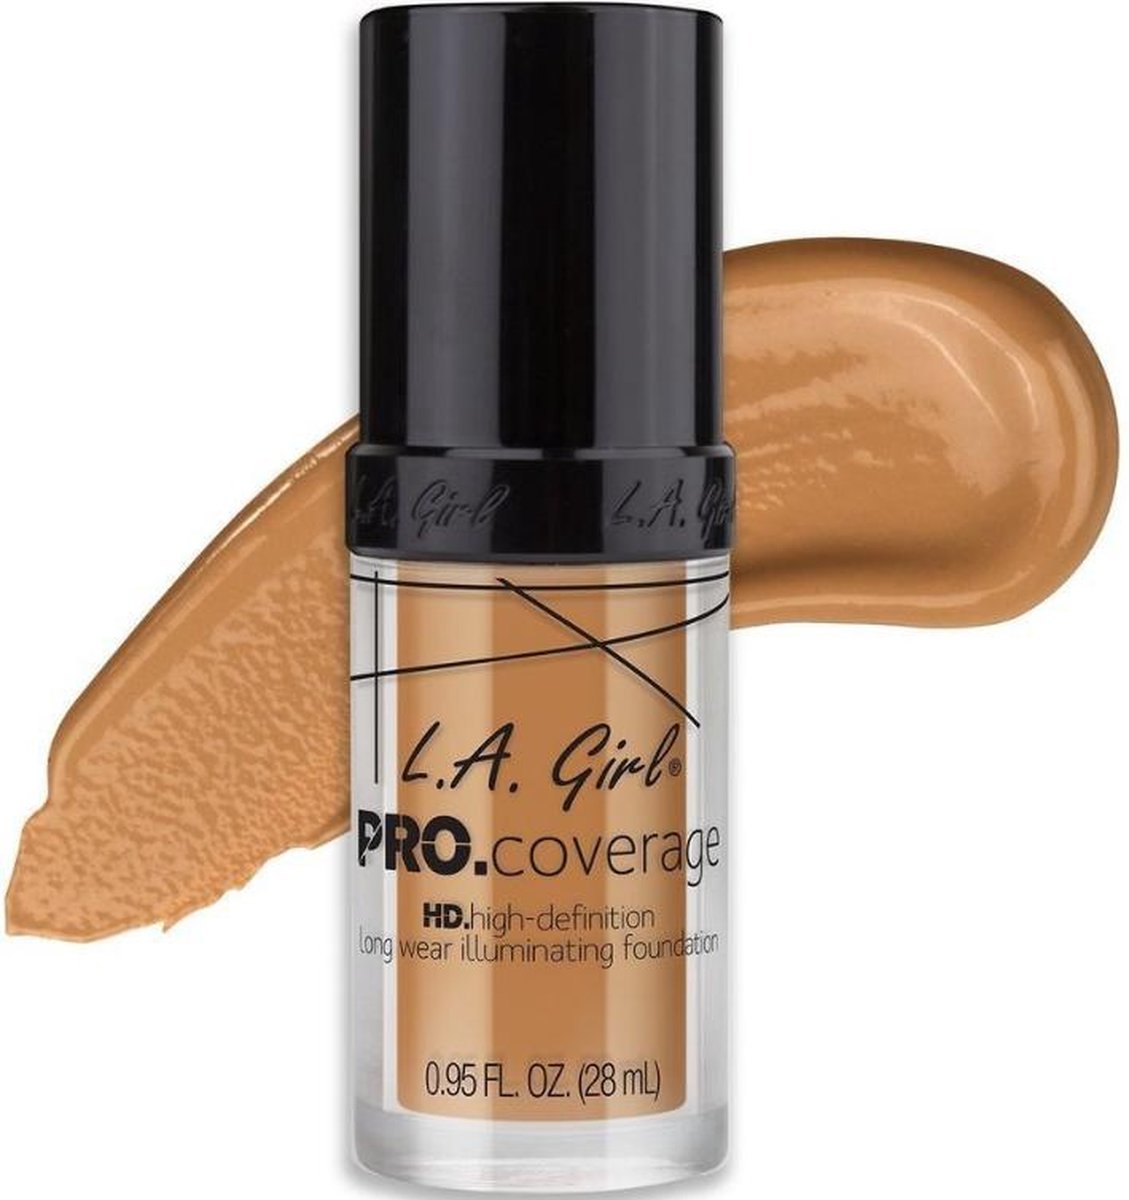 L.A. Girl Pro Coverage HD Foundation Nude Beige